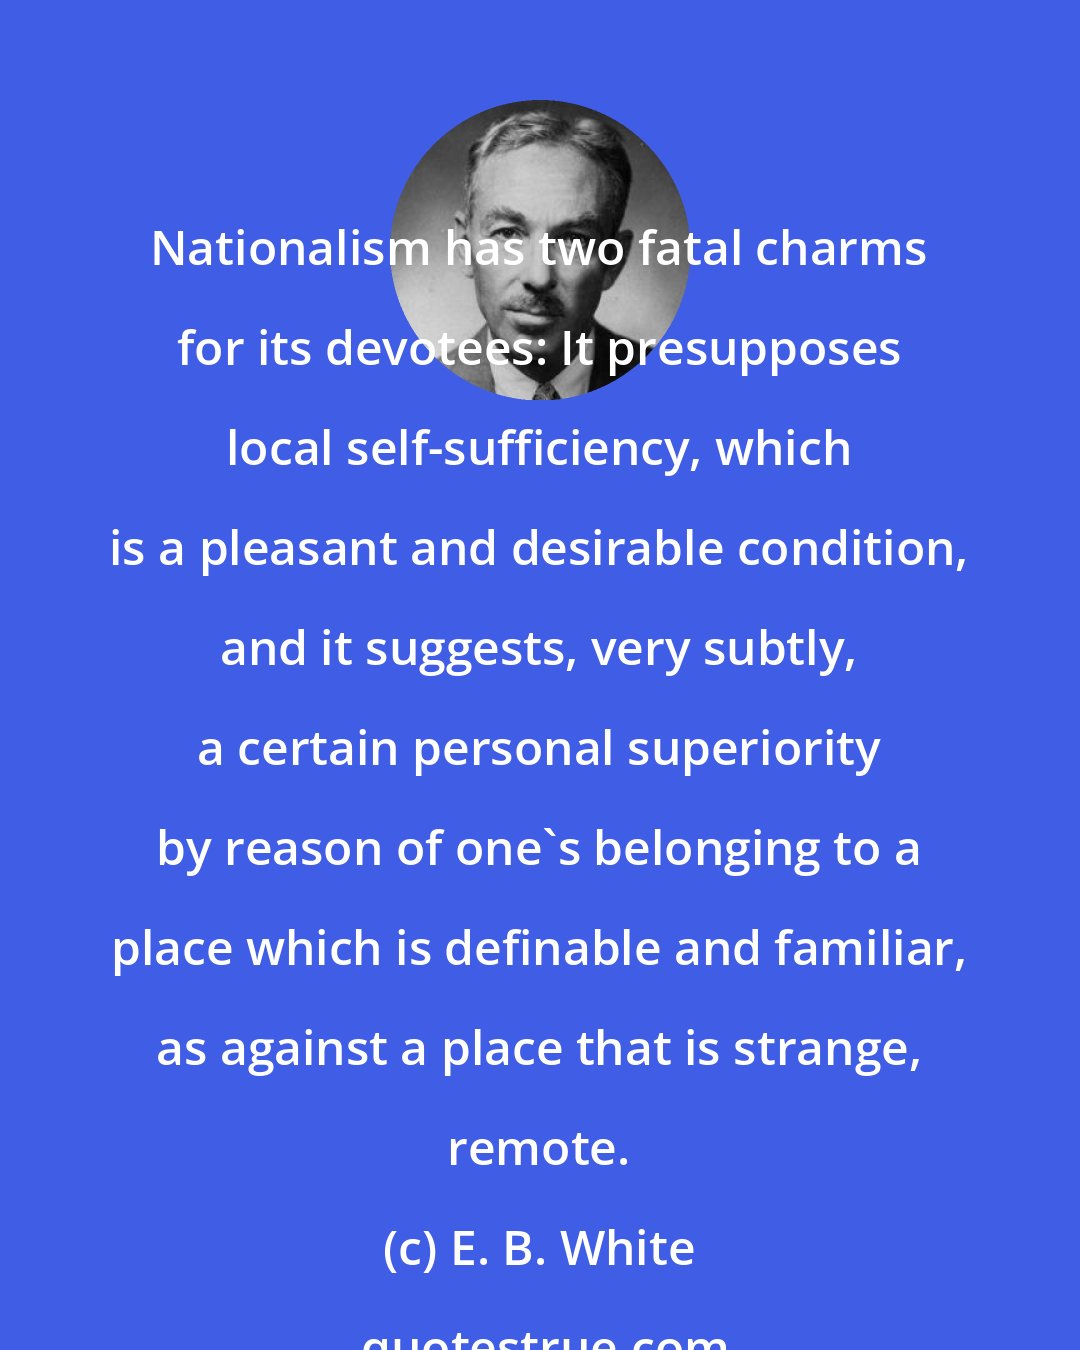 E. B. White: Nationalism has two fatal charms for its devotees: It presupposes local self-sufficiency, which is a pleasant and desirable condition, and it suggests, very subtly, a certain personal superiority by reason of one's belonging to a place which is definable and familiar, as against a place that is strange, remote.